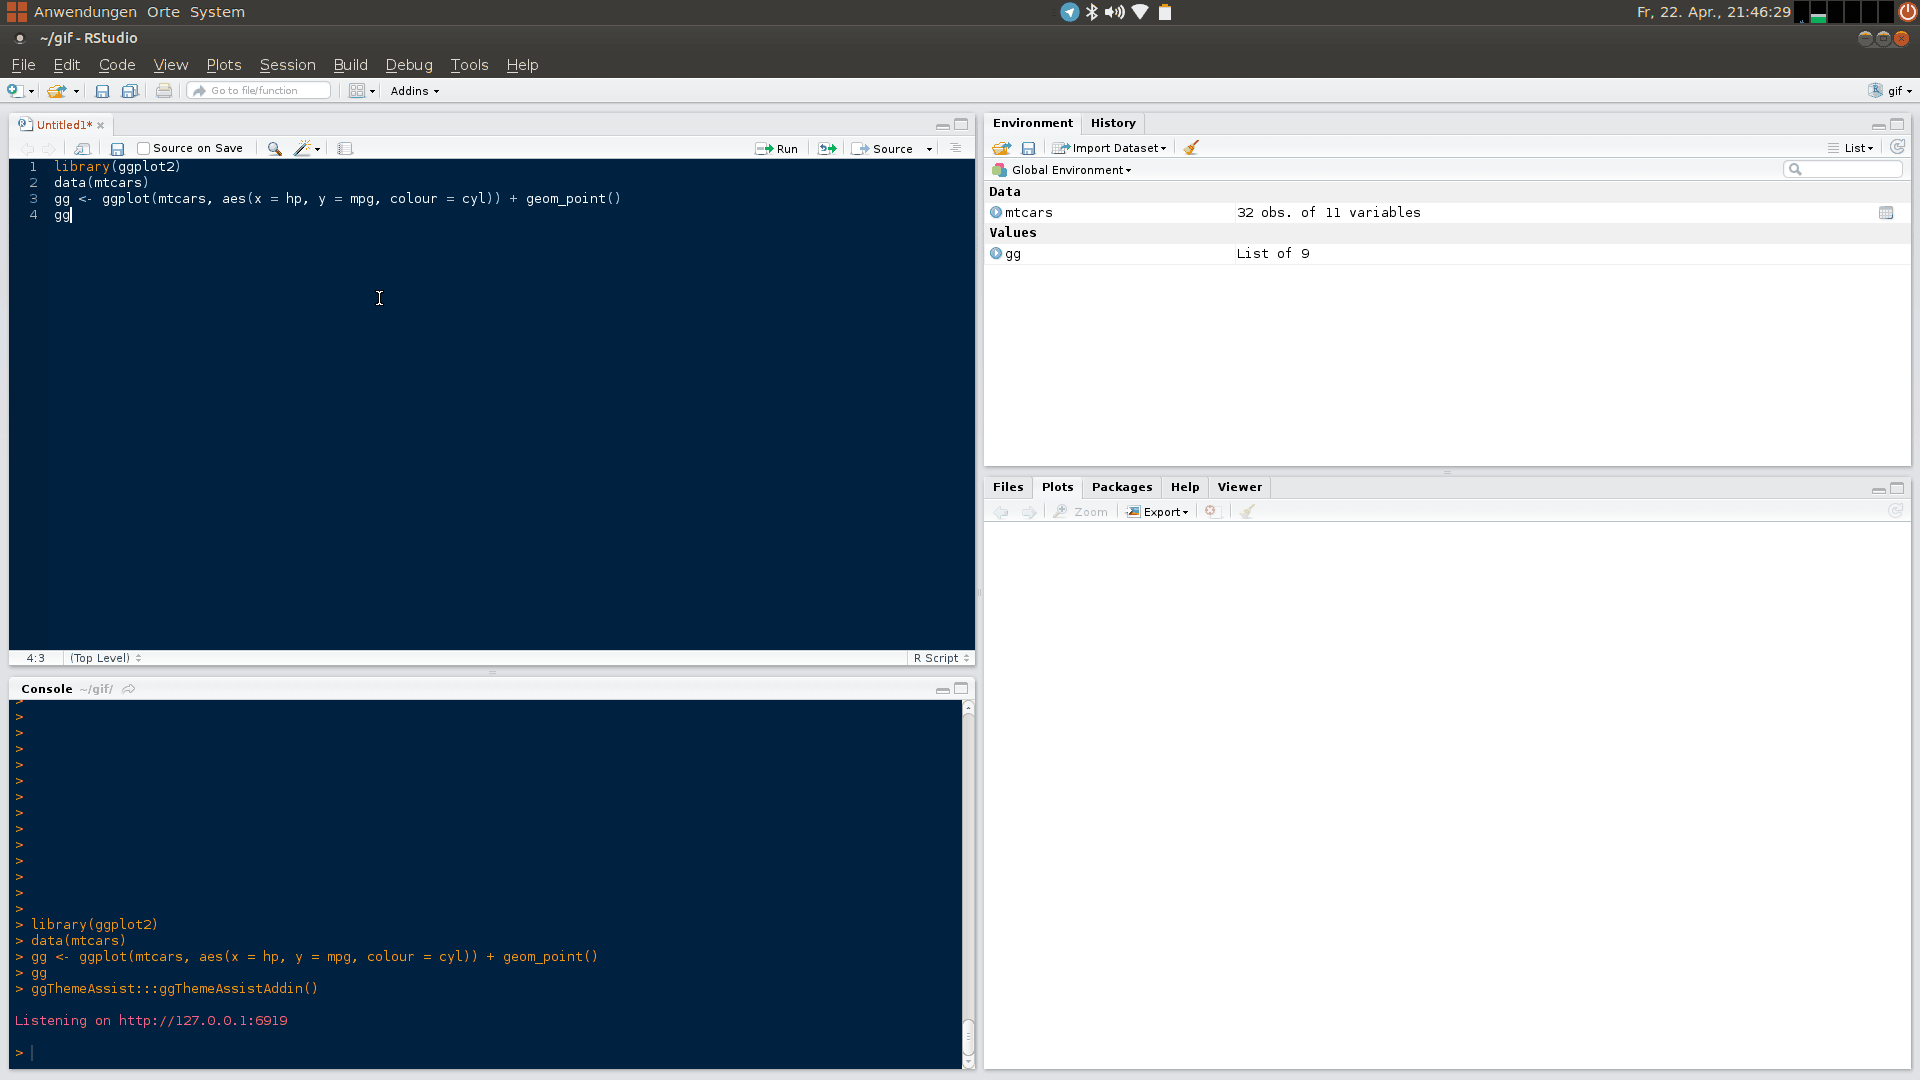 An example of how to use the `ggThemeAssist` package from the `ggThemeAssist` [website](https://github.com/calligross/ggthemeassist/). Be nice to yourself and get use this package.